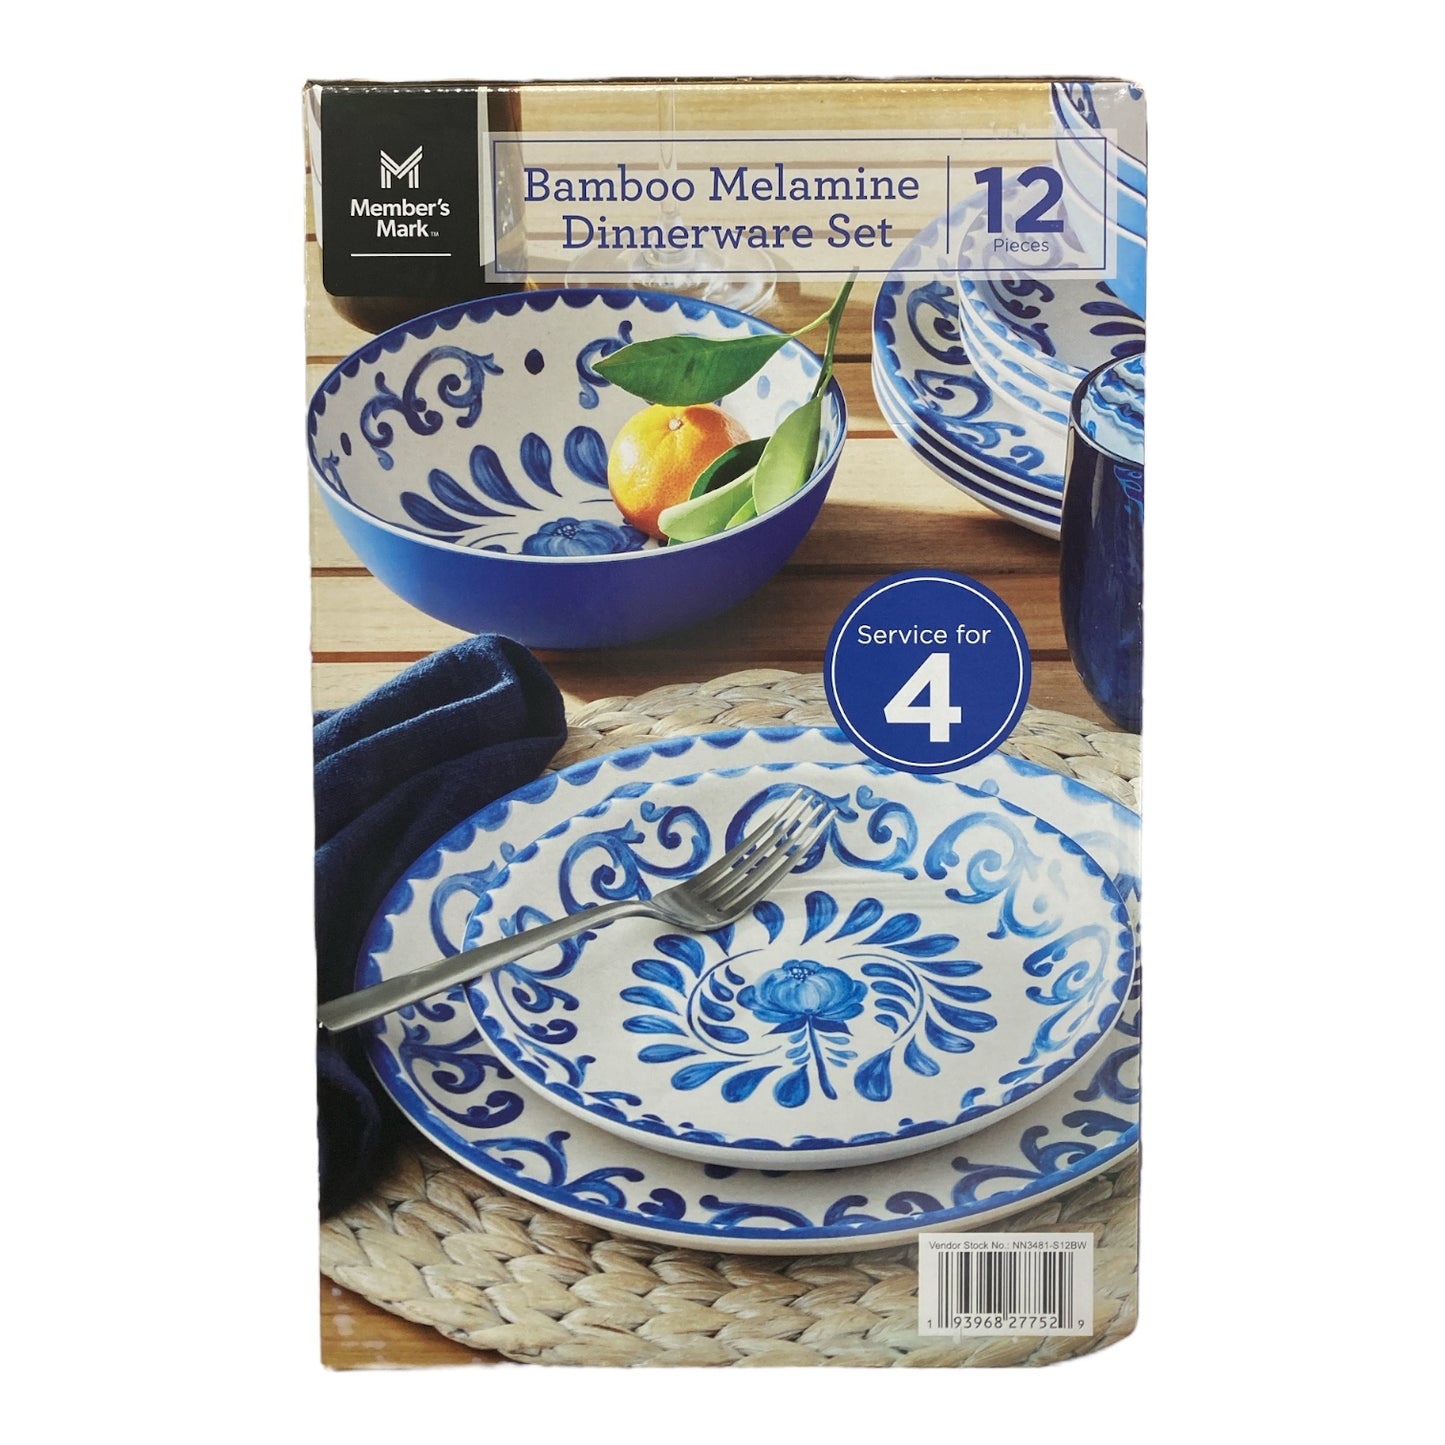 Member's Mark 10-Piece Bamboo Melamine Mixing Bowls with Lids Set (Color Block)